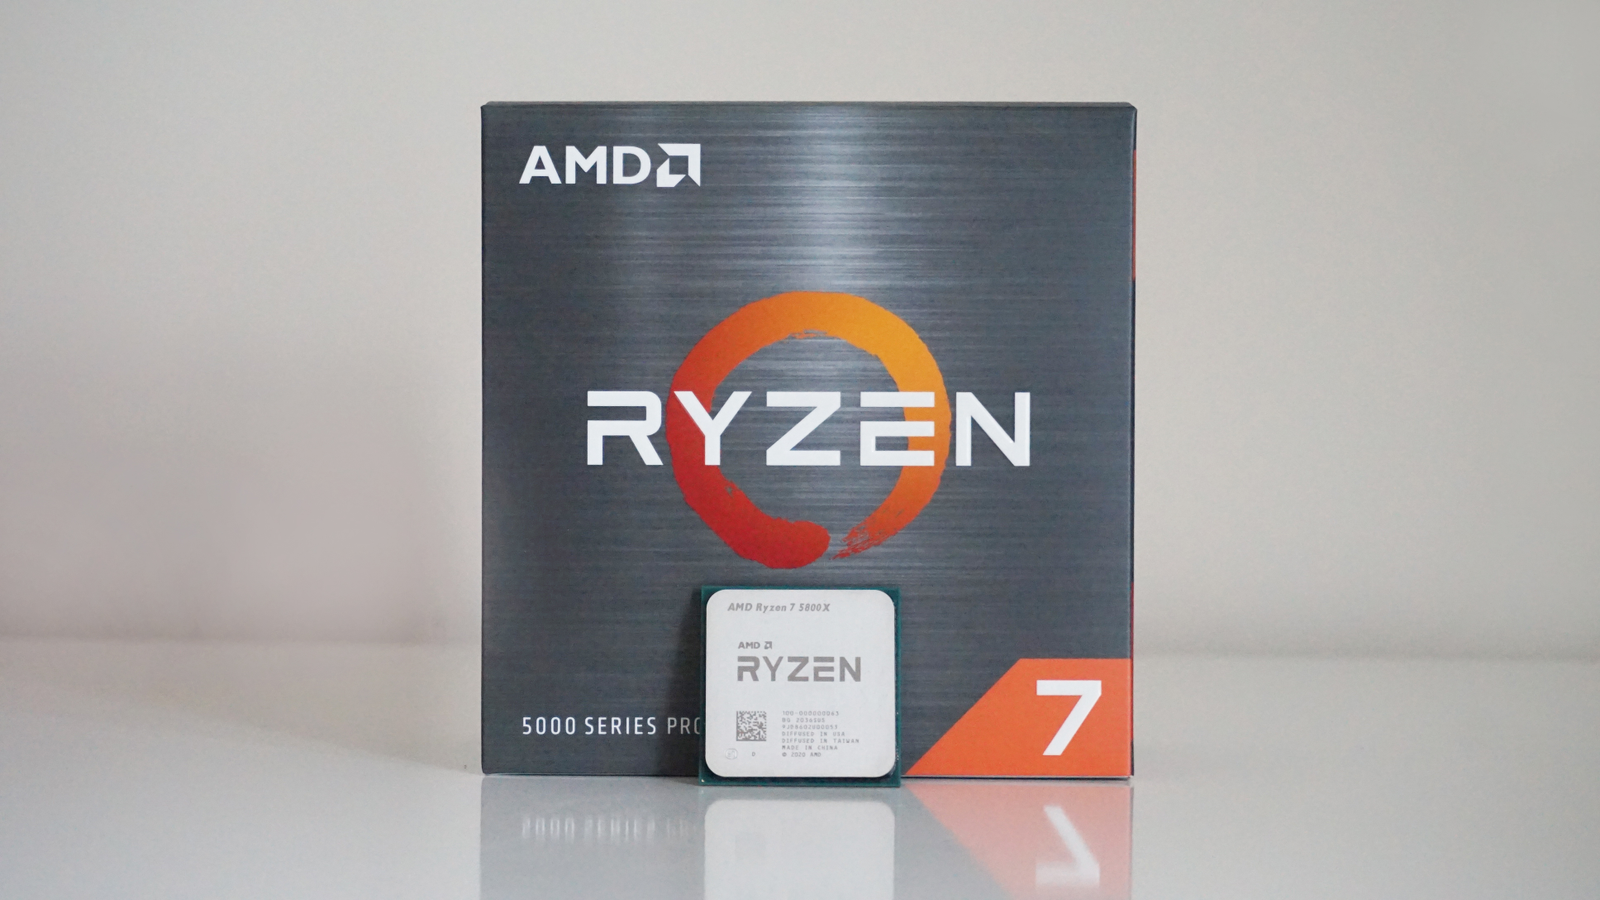 AMD Ryzen 7 5800X review: A potent octa-core desktop CPU without as strong  an identity as its siblings